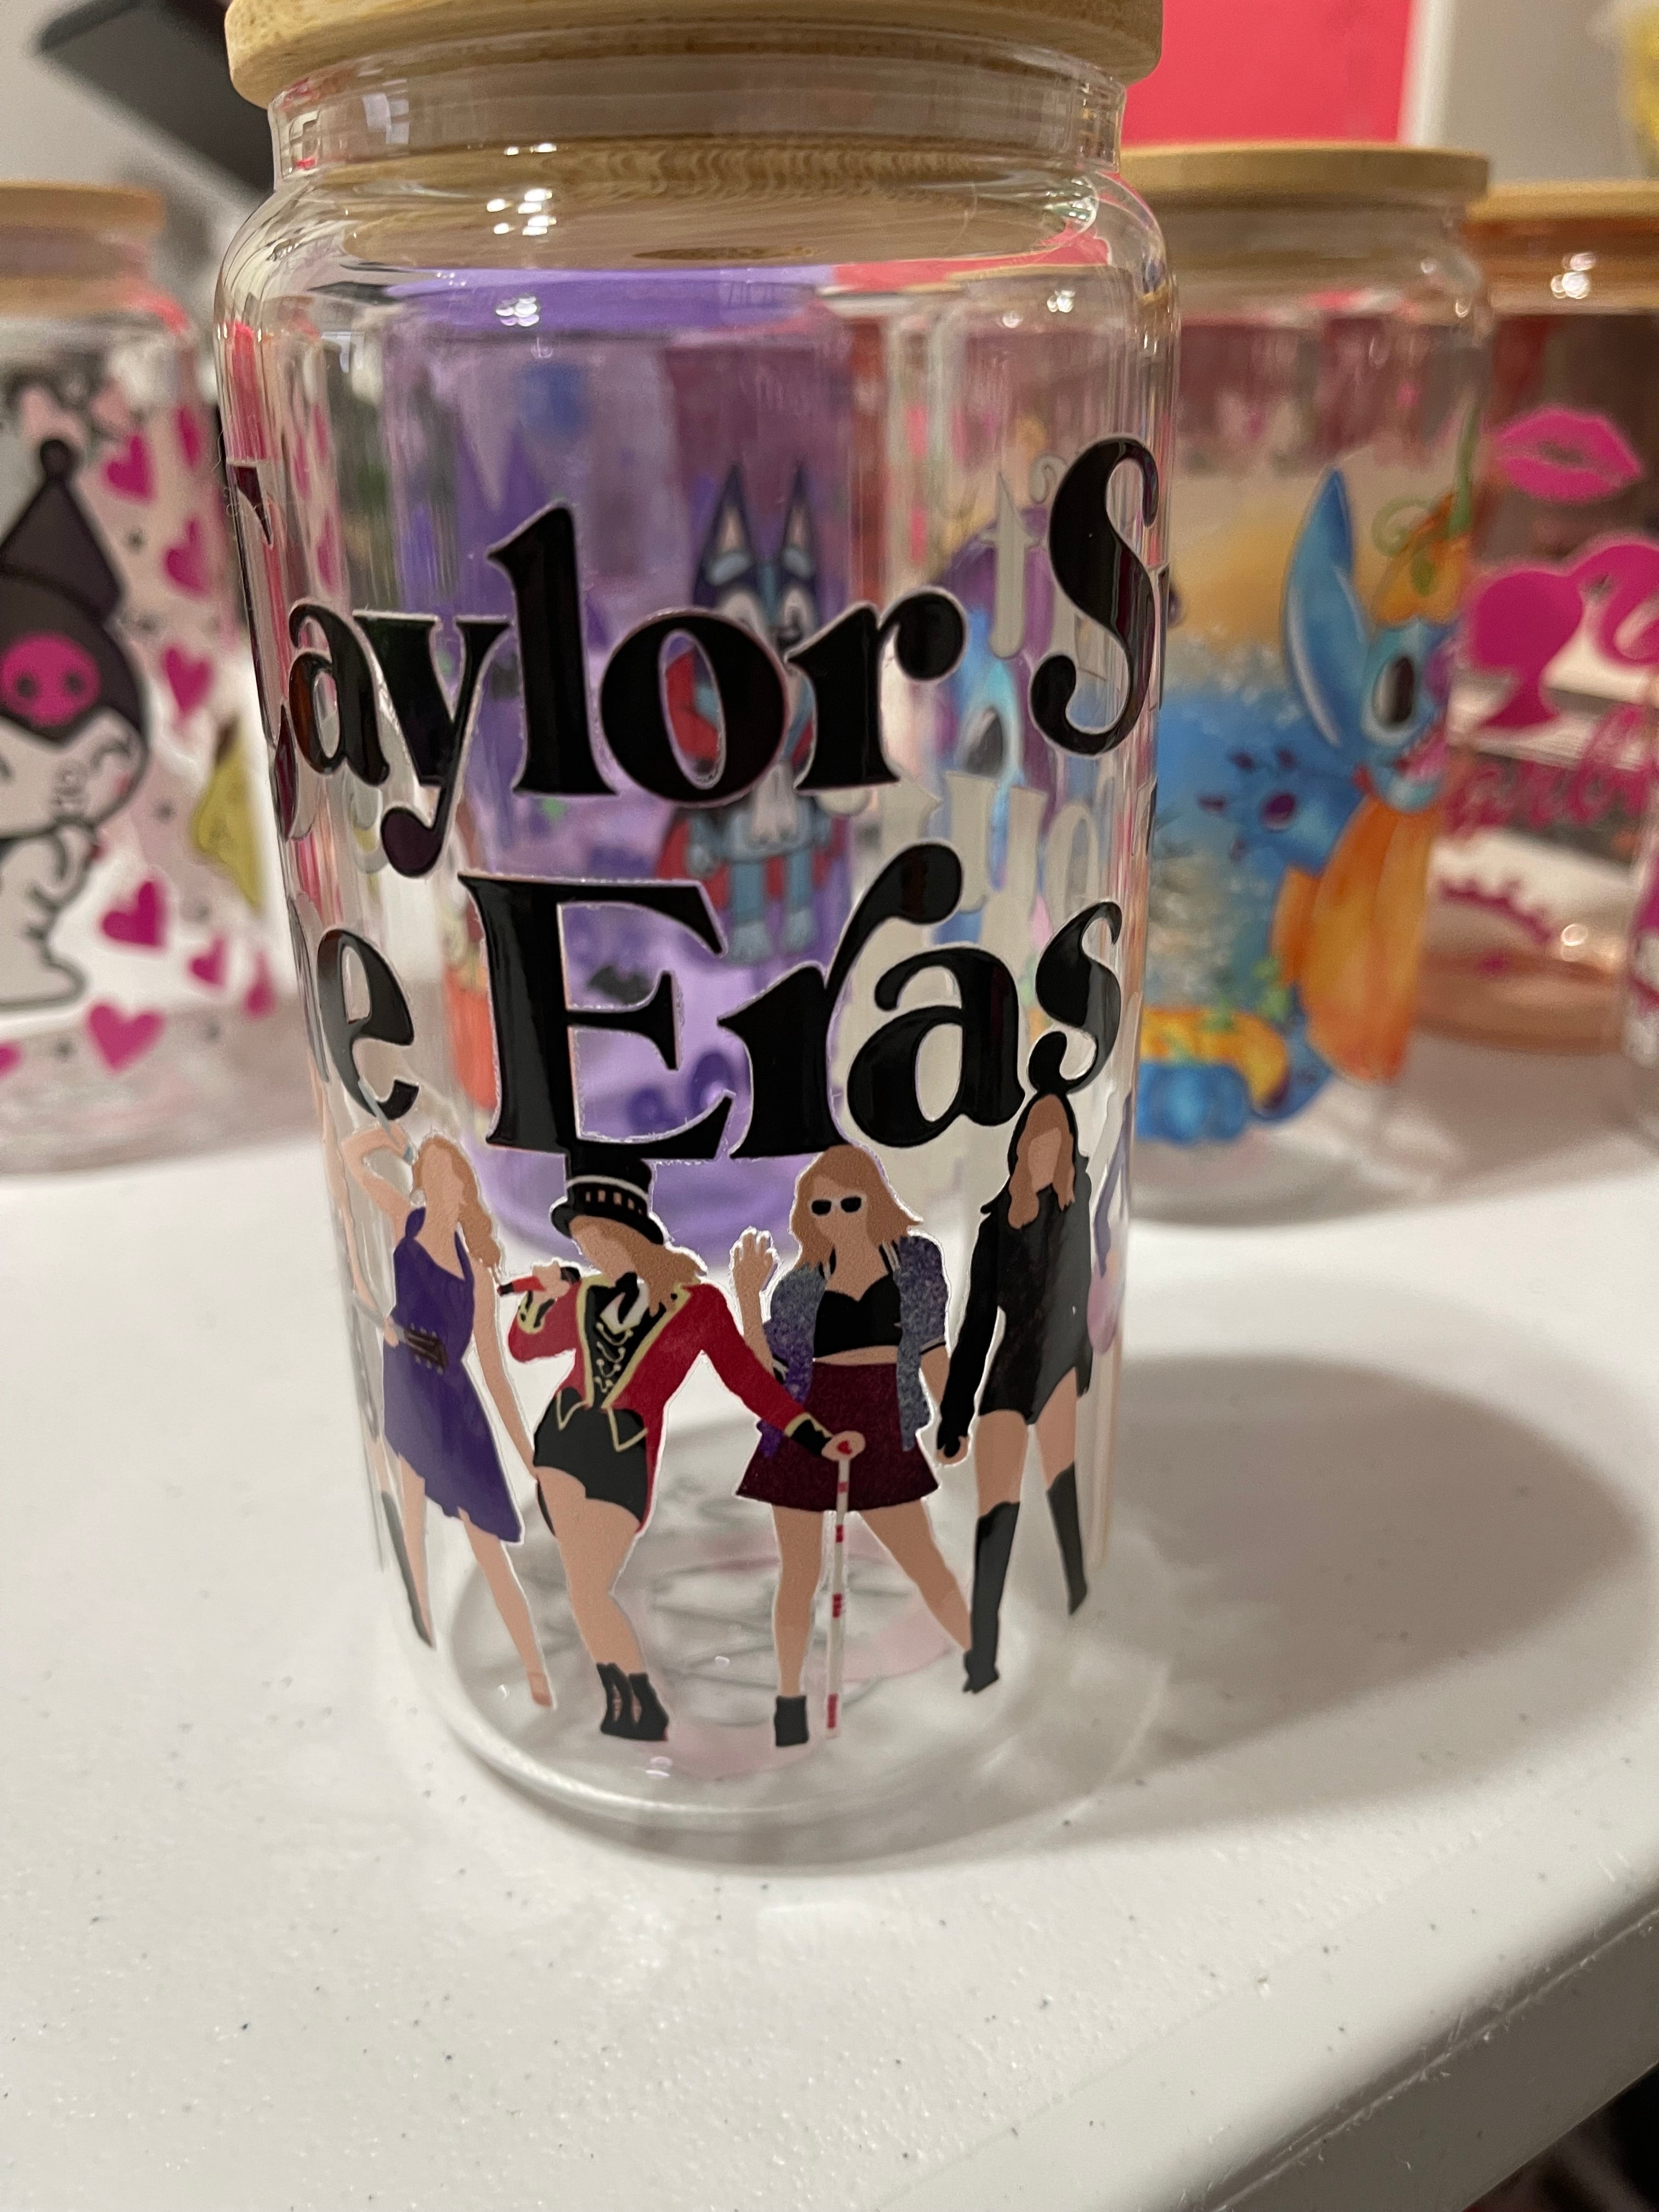 Replying to @✨Mía✨ Make your own DIY #erastour merch cold cup